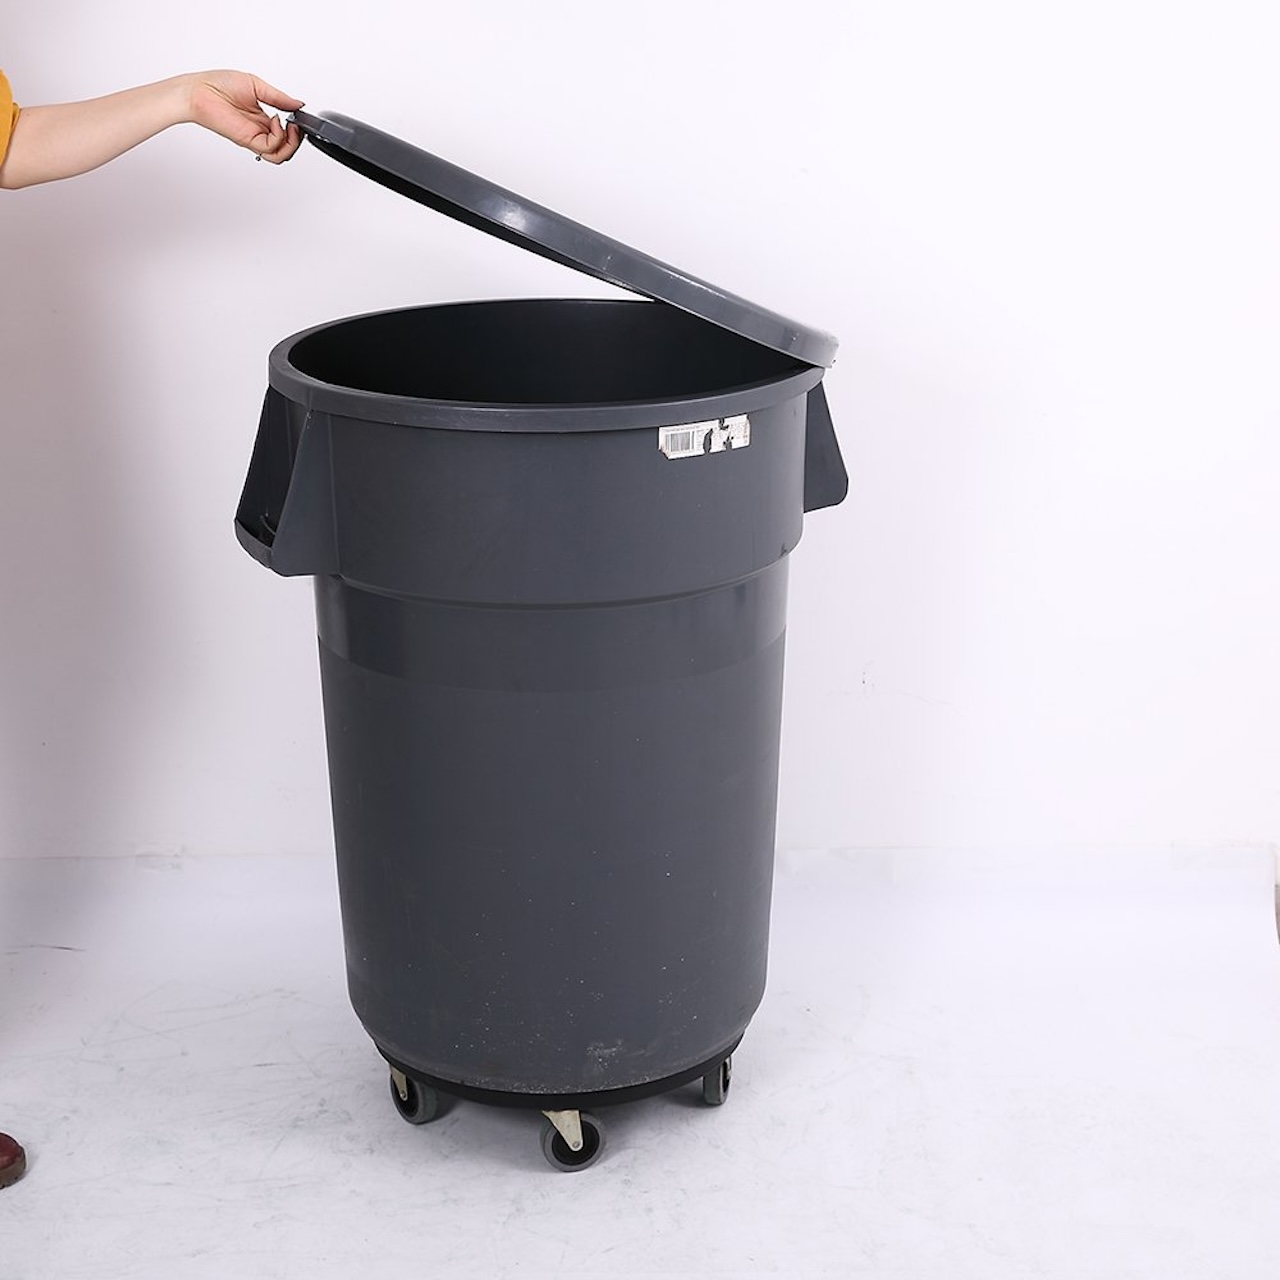 How Big Is A 30 Gallon Trash Can